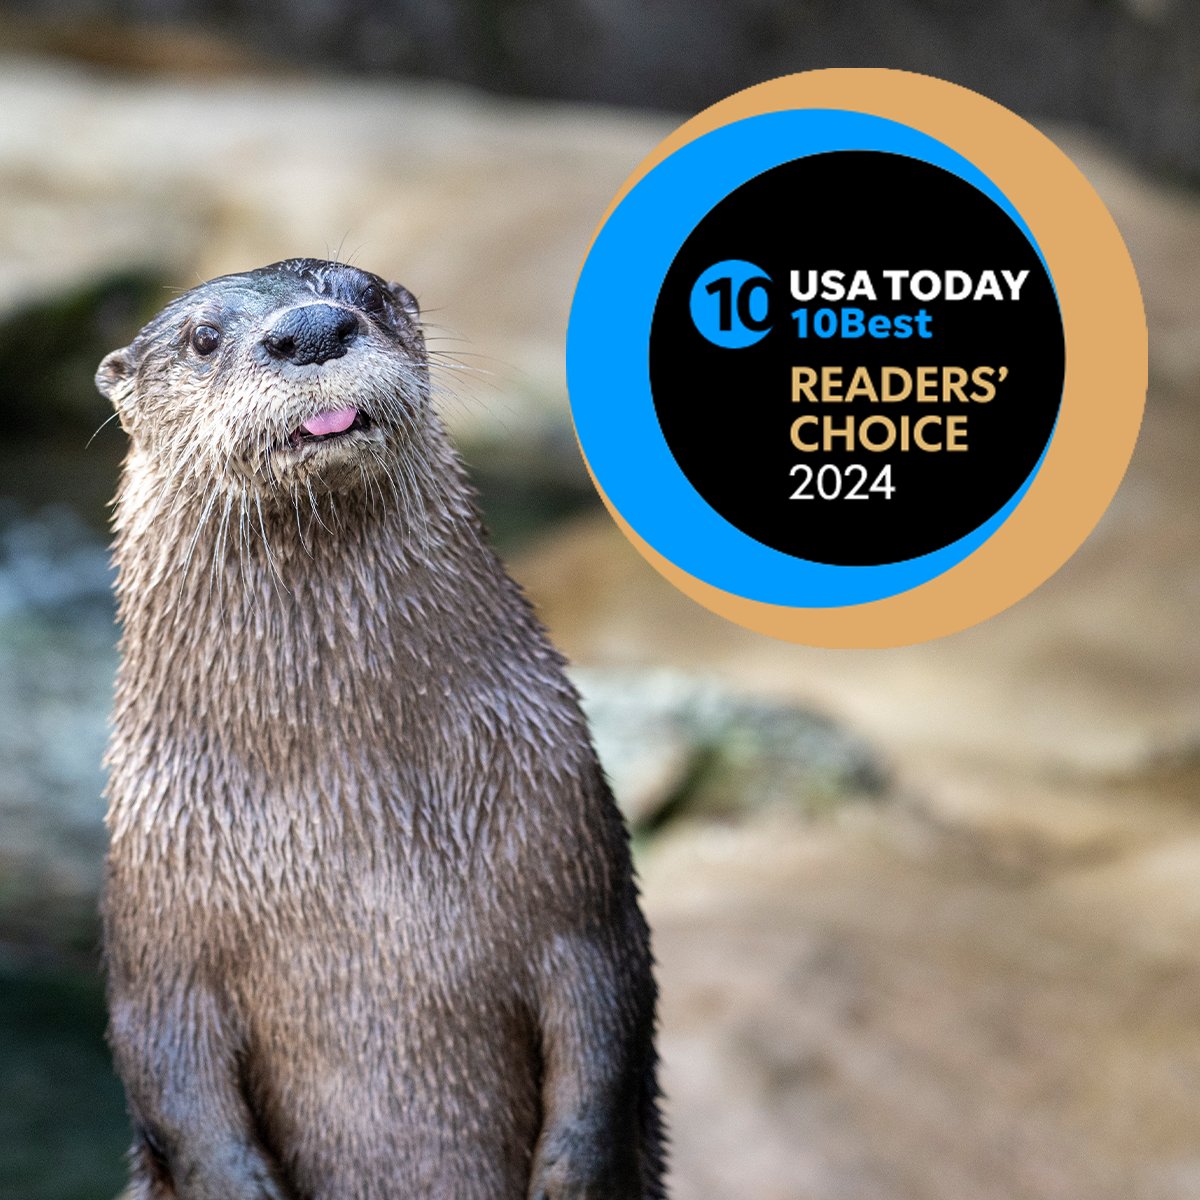 It's time to vote! 🥇 bit.ly/Vote-The-Flori… We have been named in USA Today's 2024 Readers' Choice awards and we need your help to rise to the top! Share your love for The Florida Aquarium by voting once per day now through Monday, May 13 at 11:59am EST.